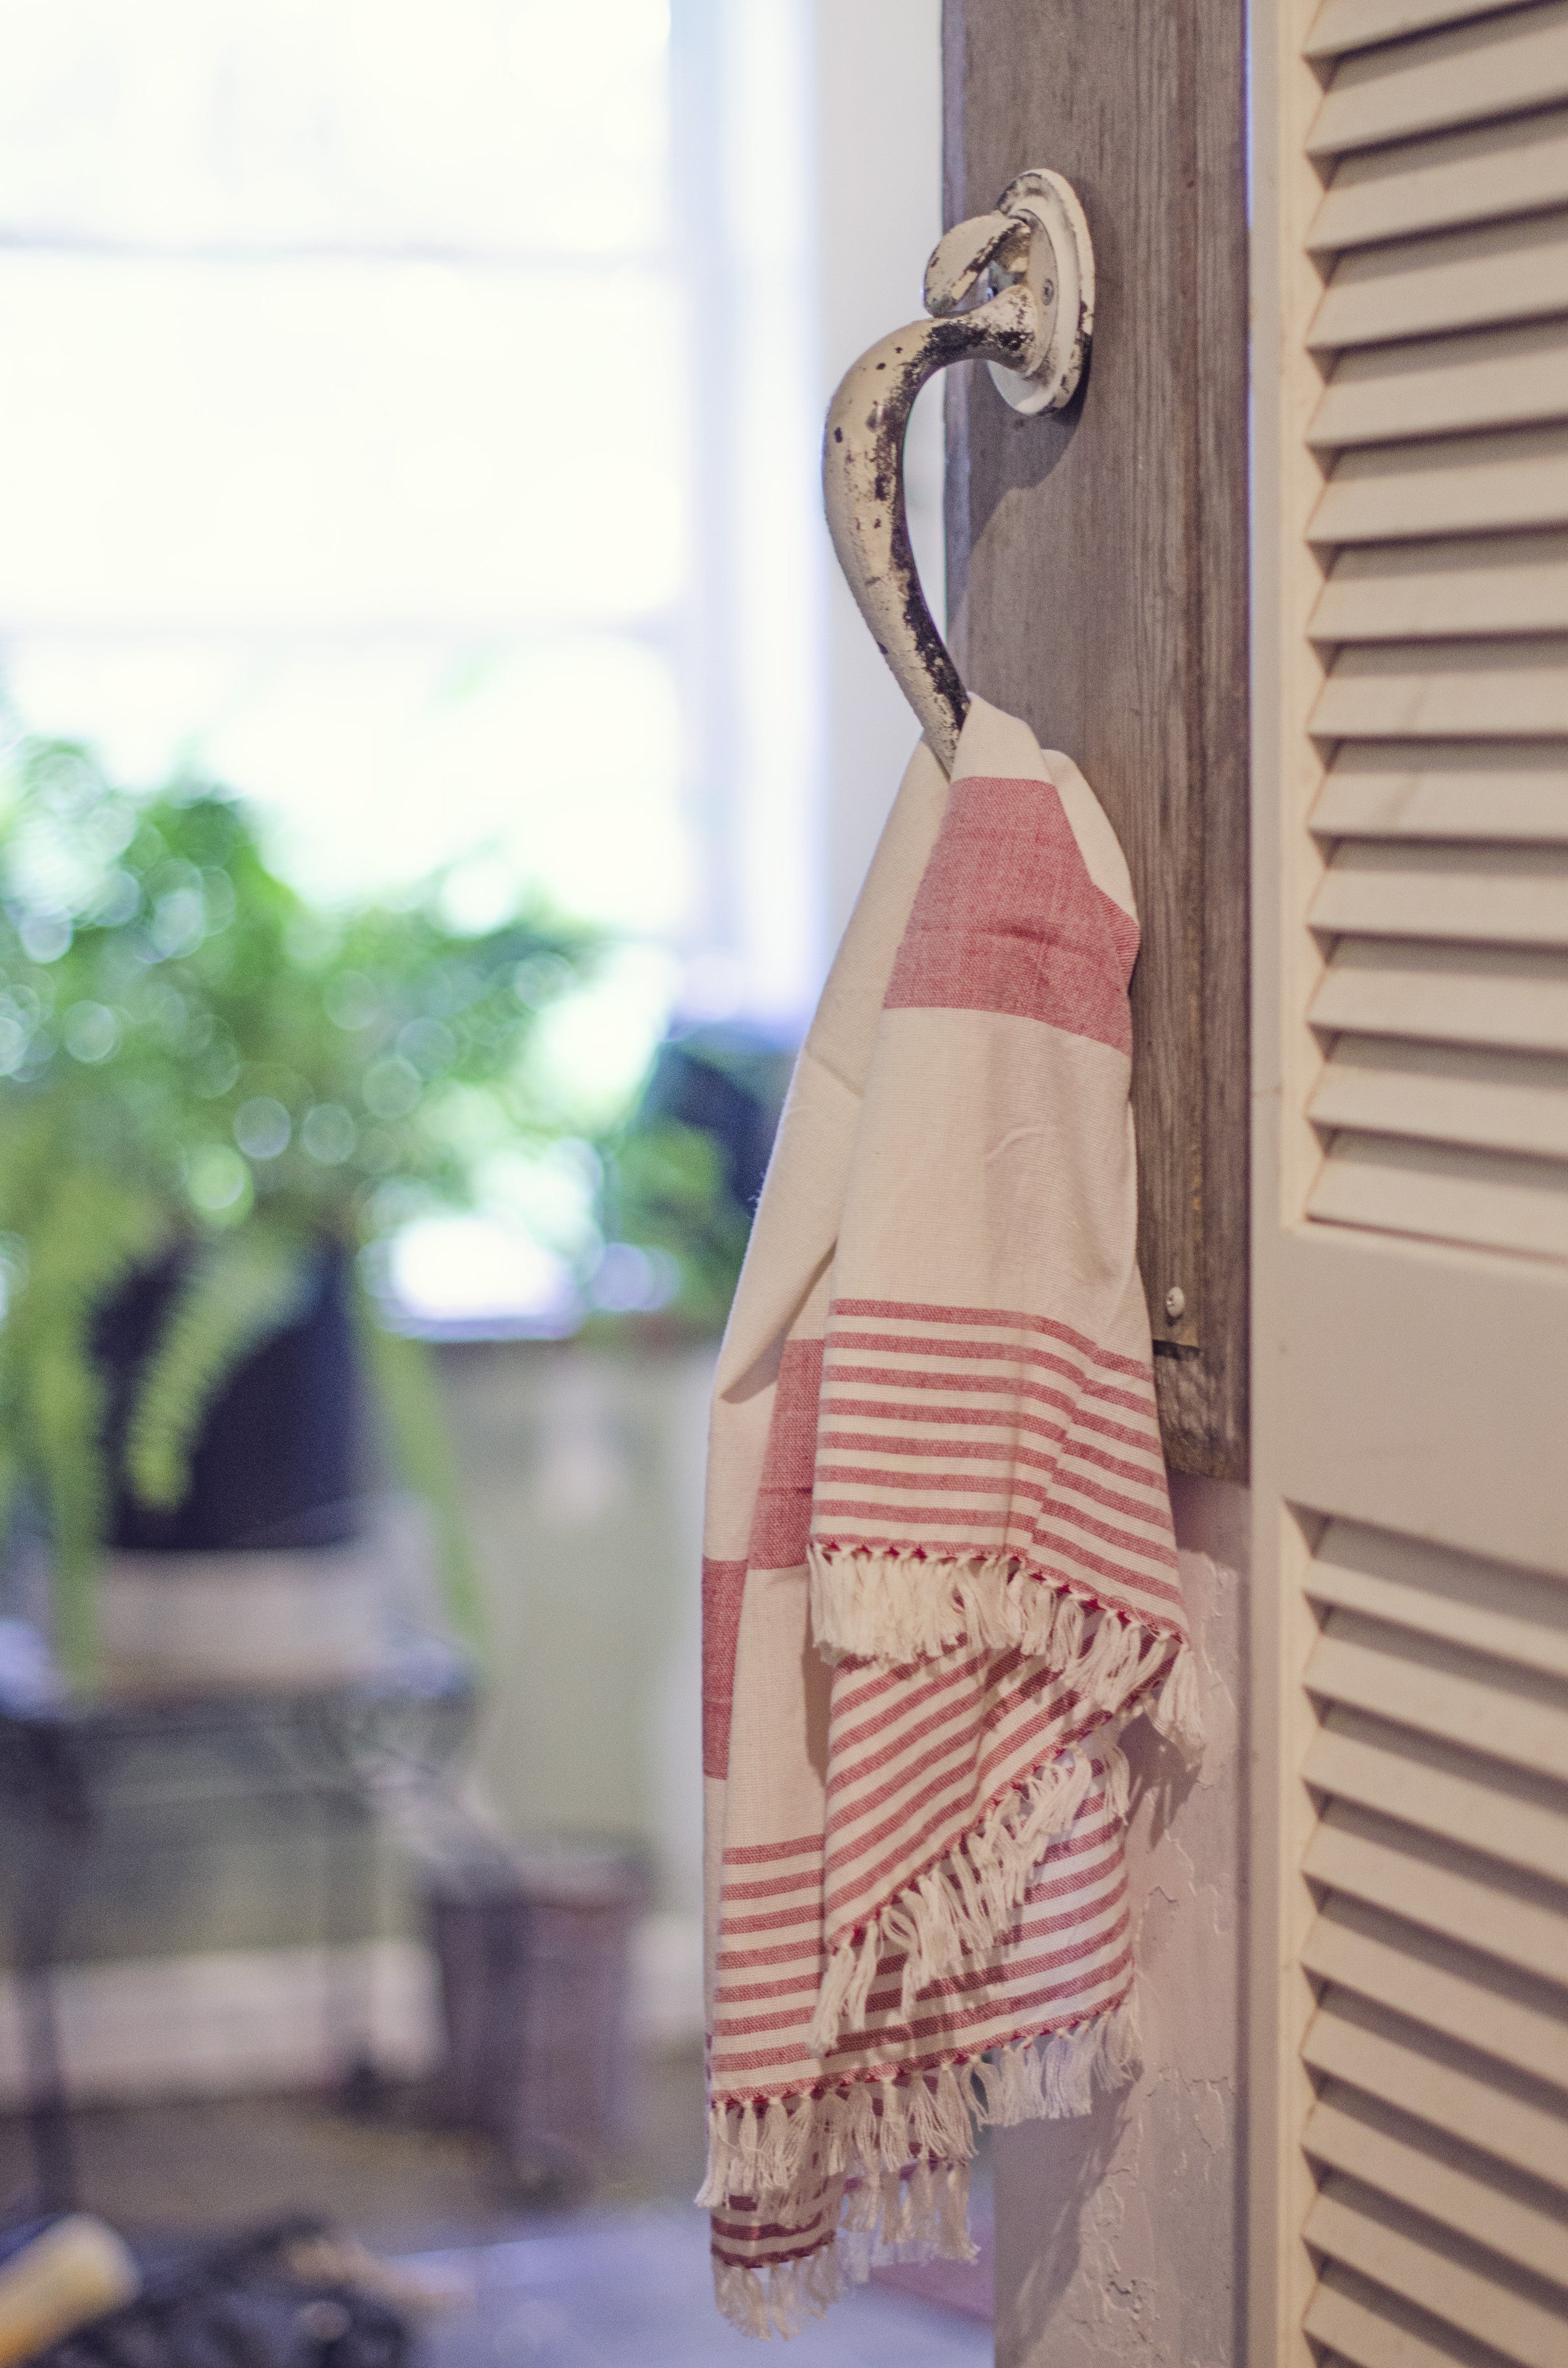  Wovoto Vintage Rustic Dish Towels for Kitchen Drying